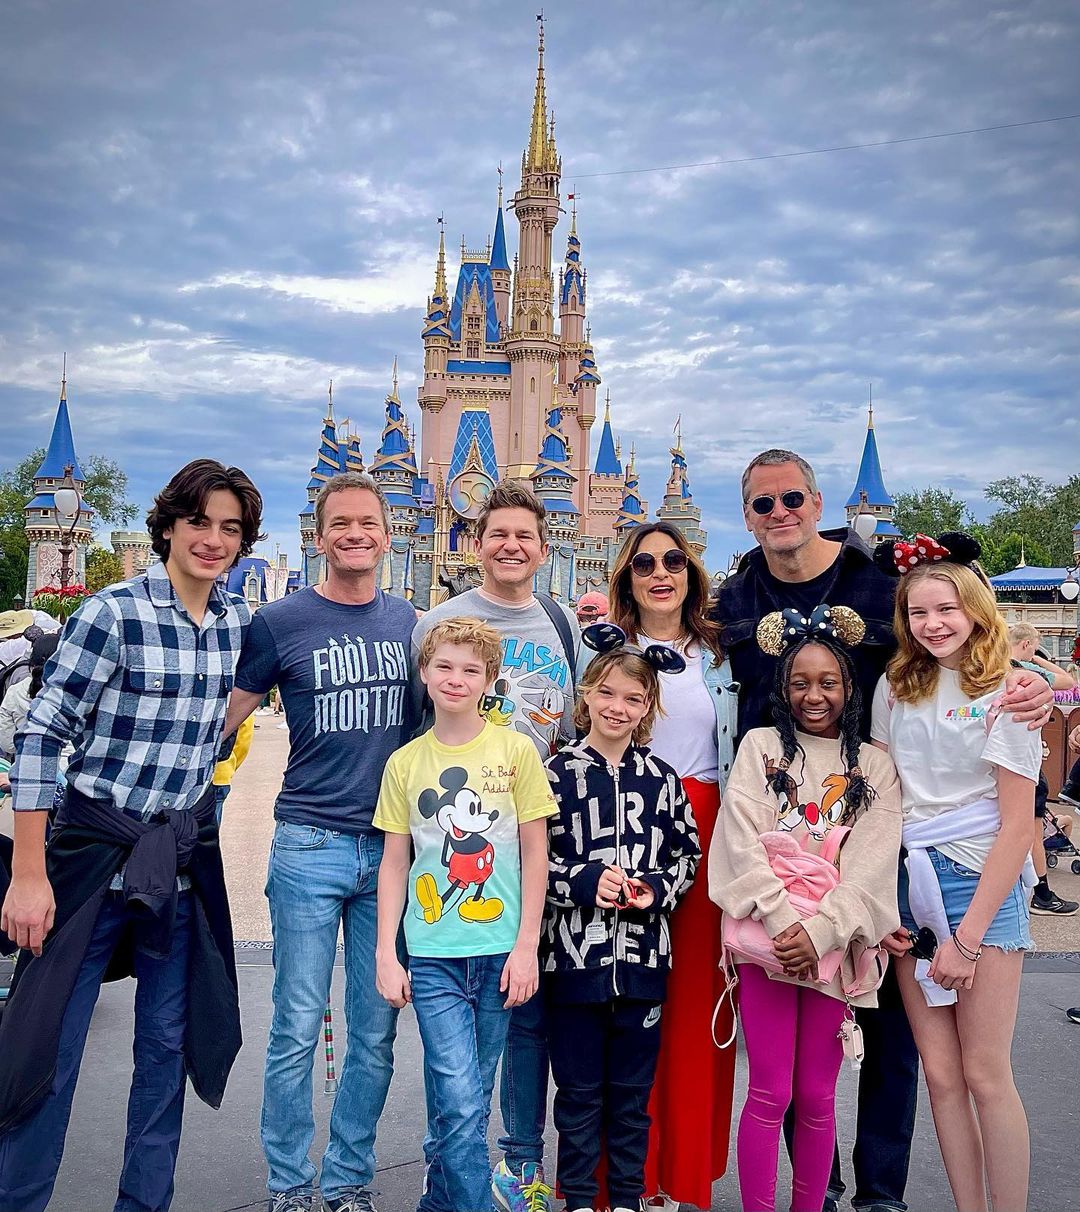 Neil Patrick Harris Celebrates Most Amazing Disney Adventure Last Week with Family and Friends